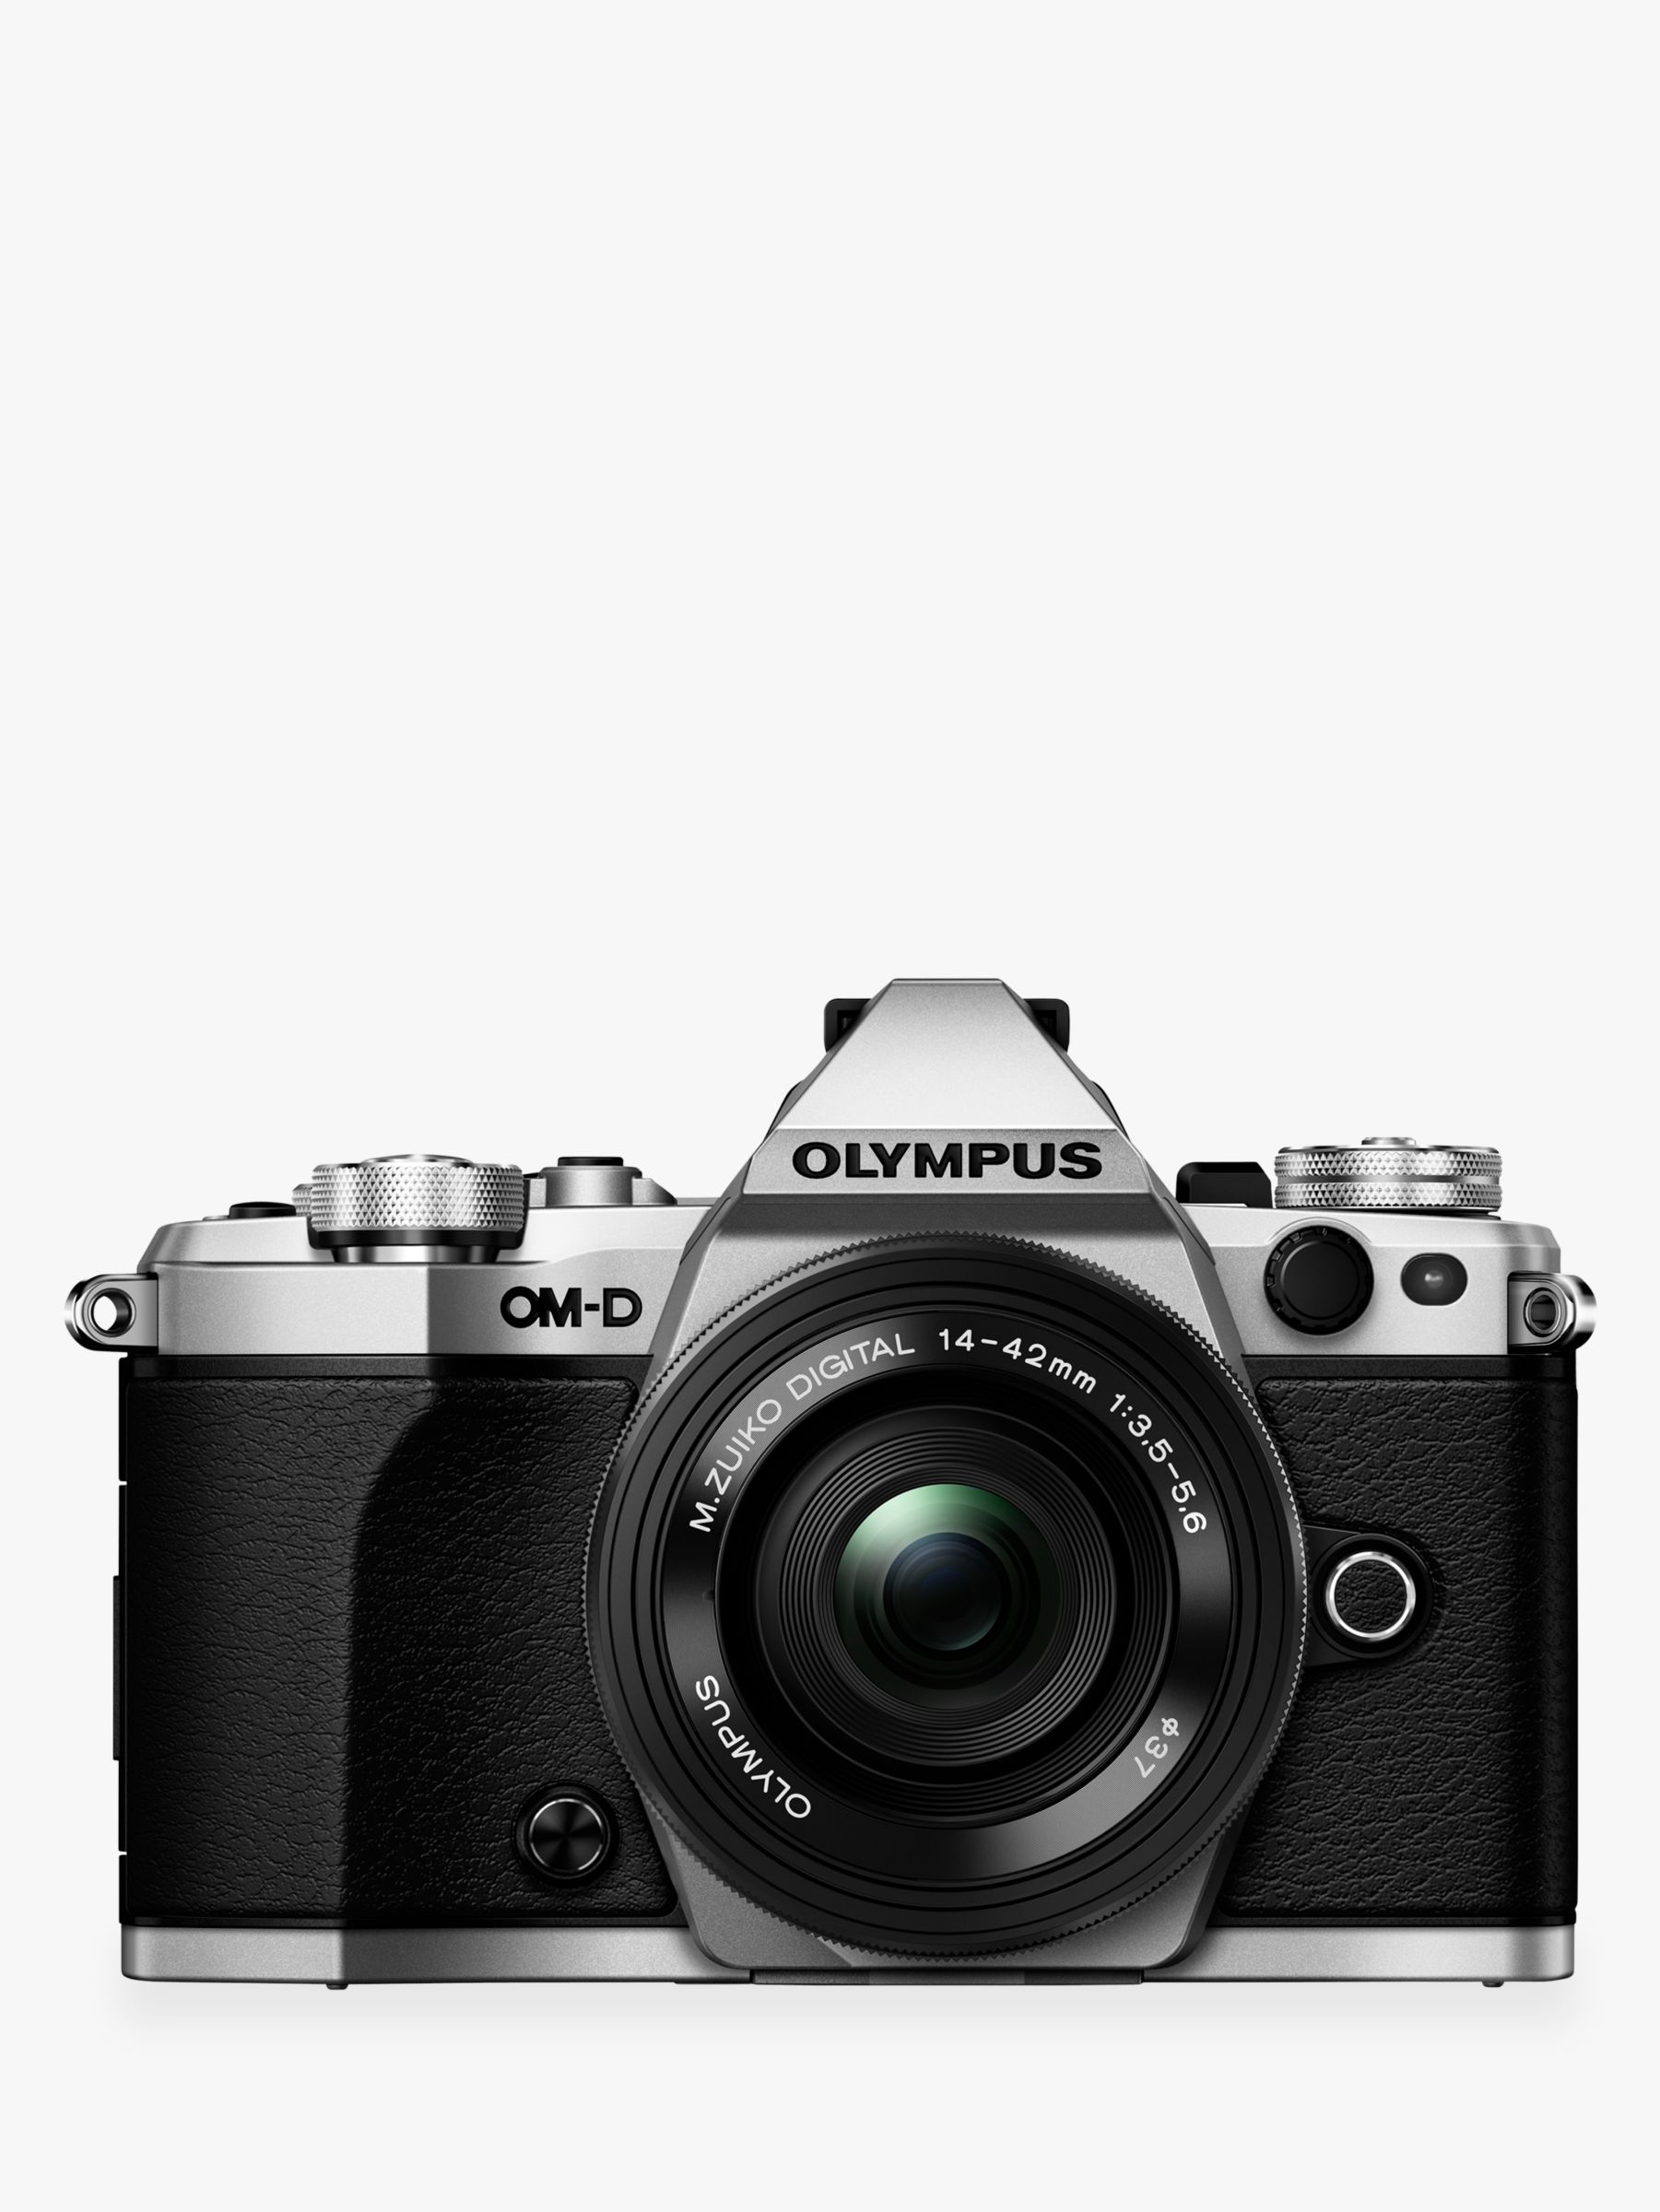 Olympus OM-D E-M5 Mark II Compact System Camera, HD 1080p, 16MP, Wi-Fi, 3 LCD Touch Screen with M.ZUIKO DIGITAL 14-42mm EZ Lens